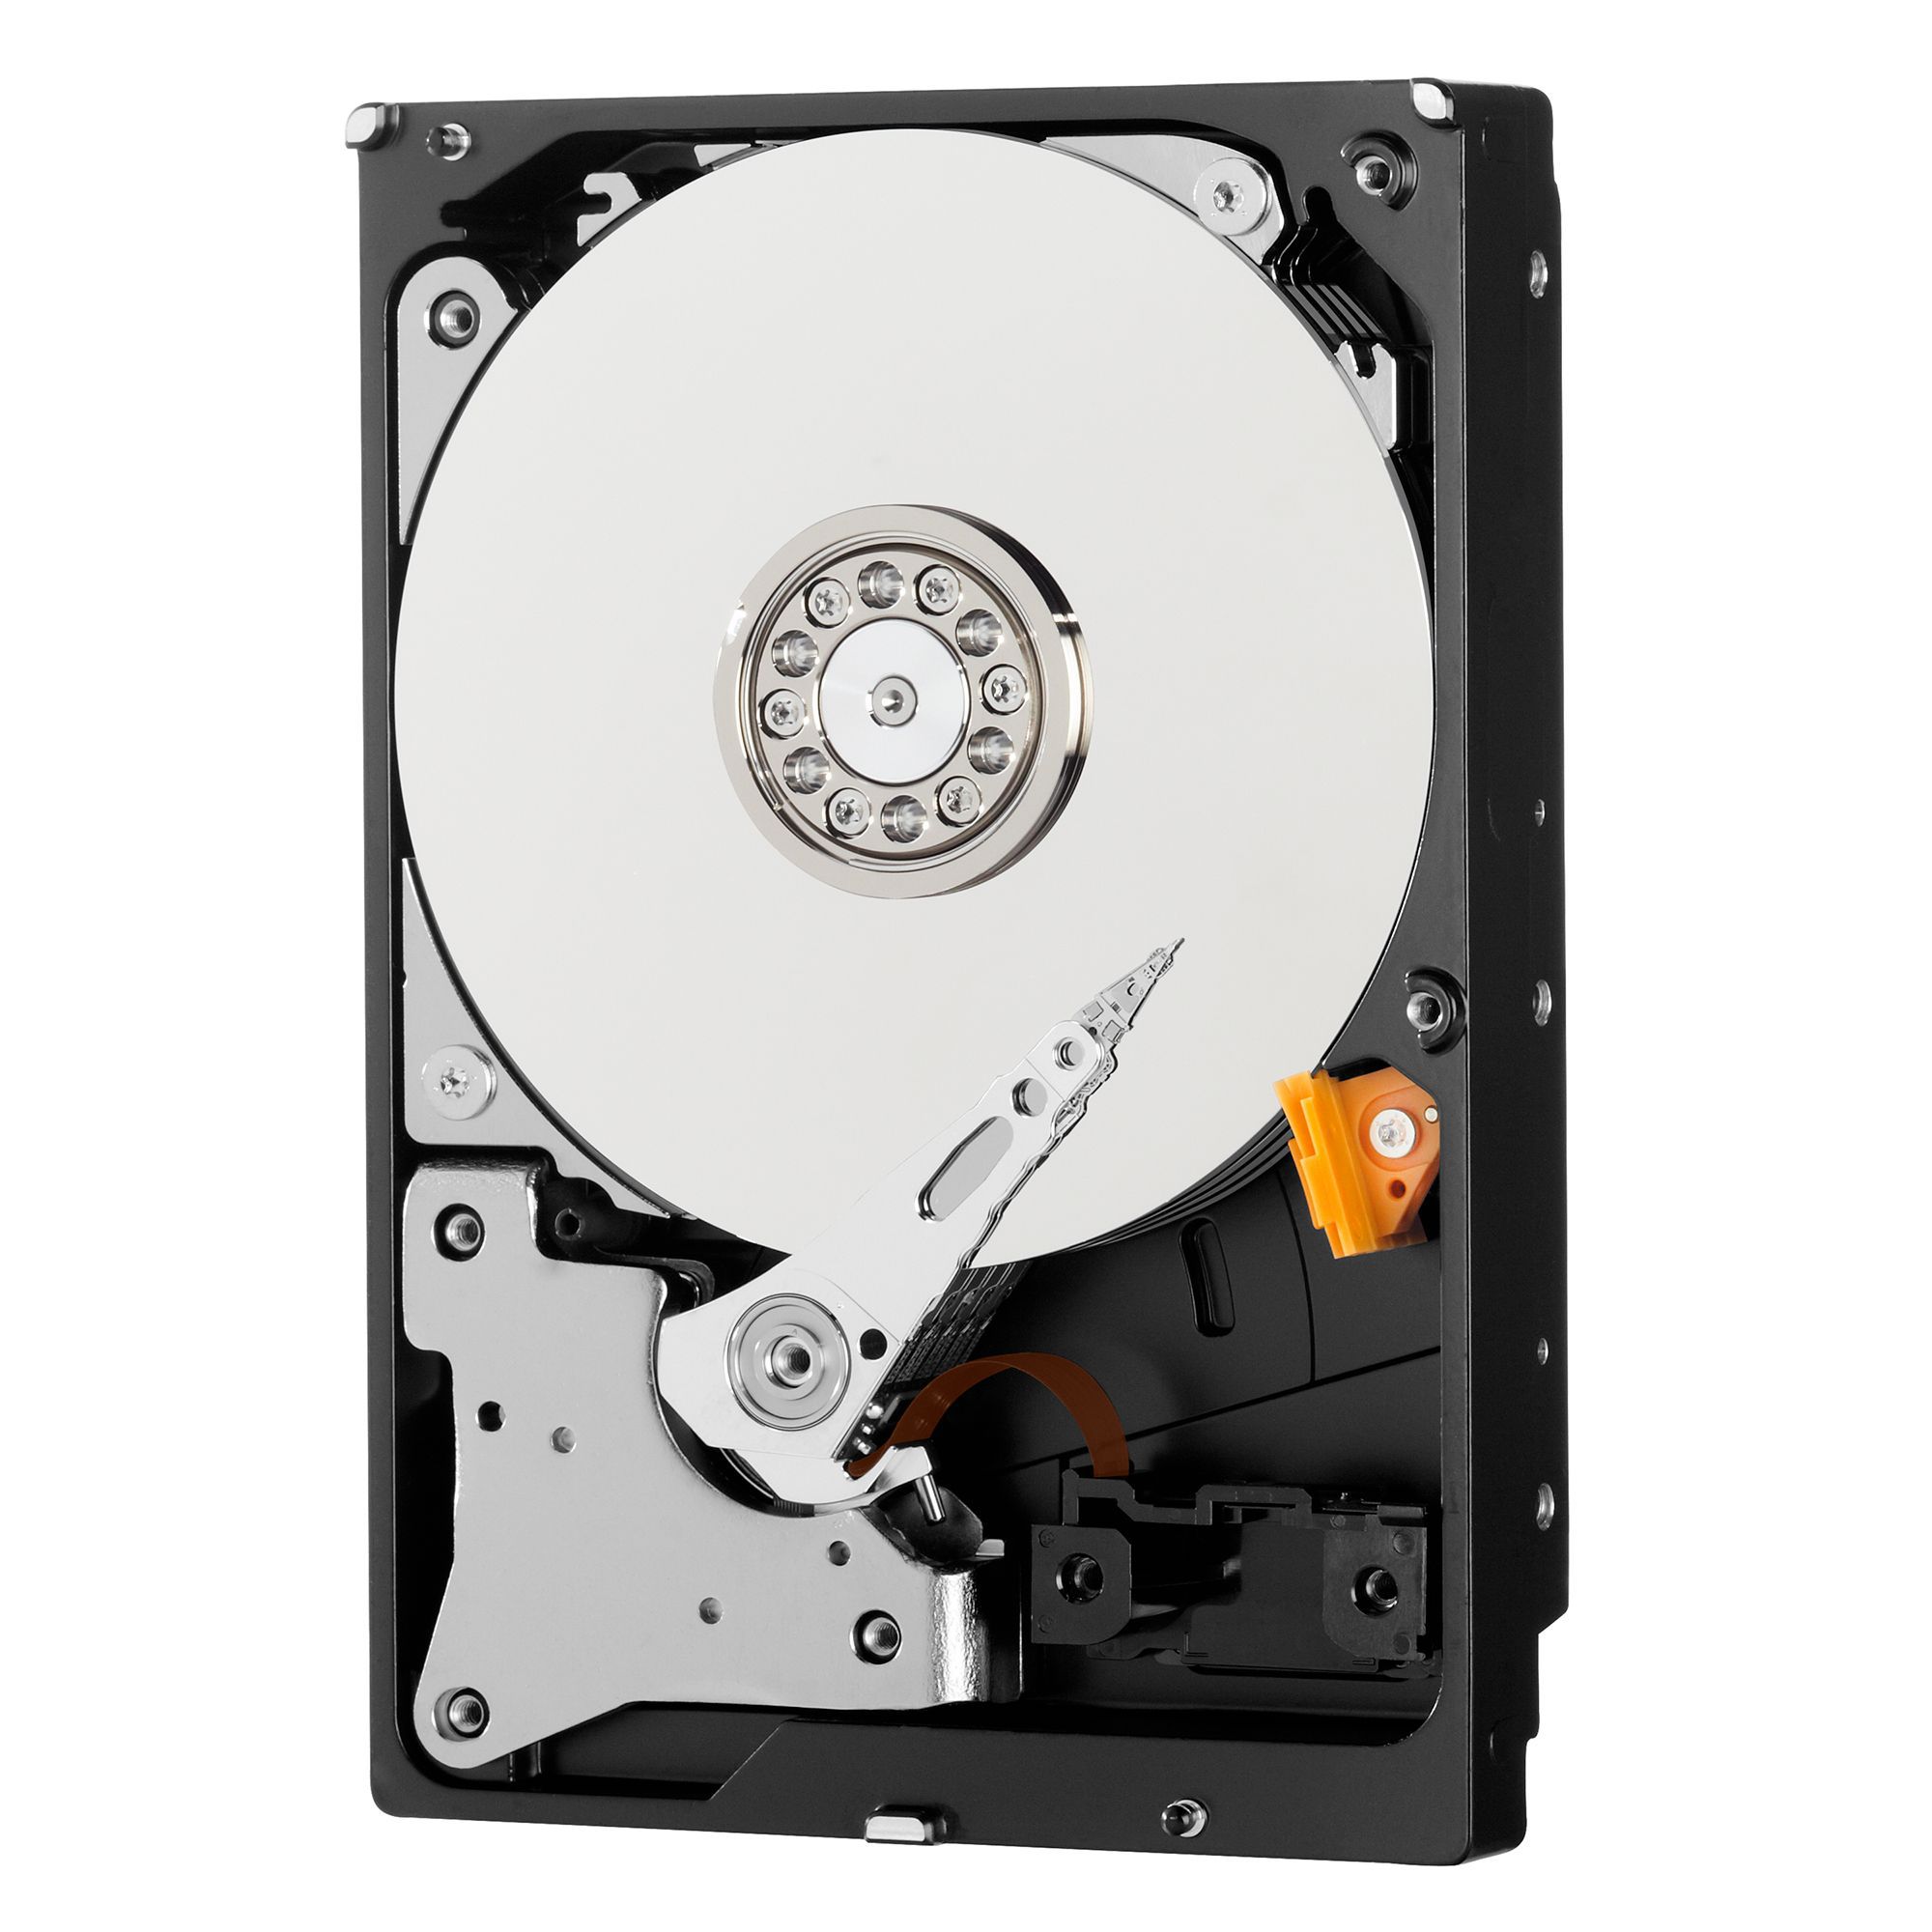 WD Red Plus 1TB SATA 6Gb/s 2.5inch 16MB Cache IntelliPower Internal 24x7 optimized for SOHO NAS systems NASware HDD Bulk_3